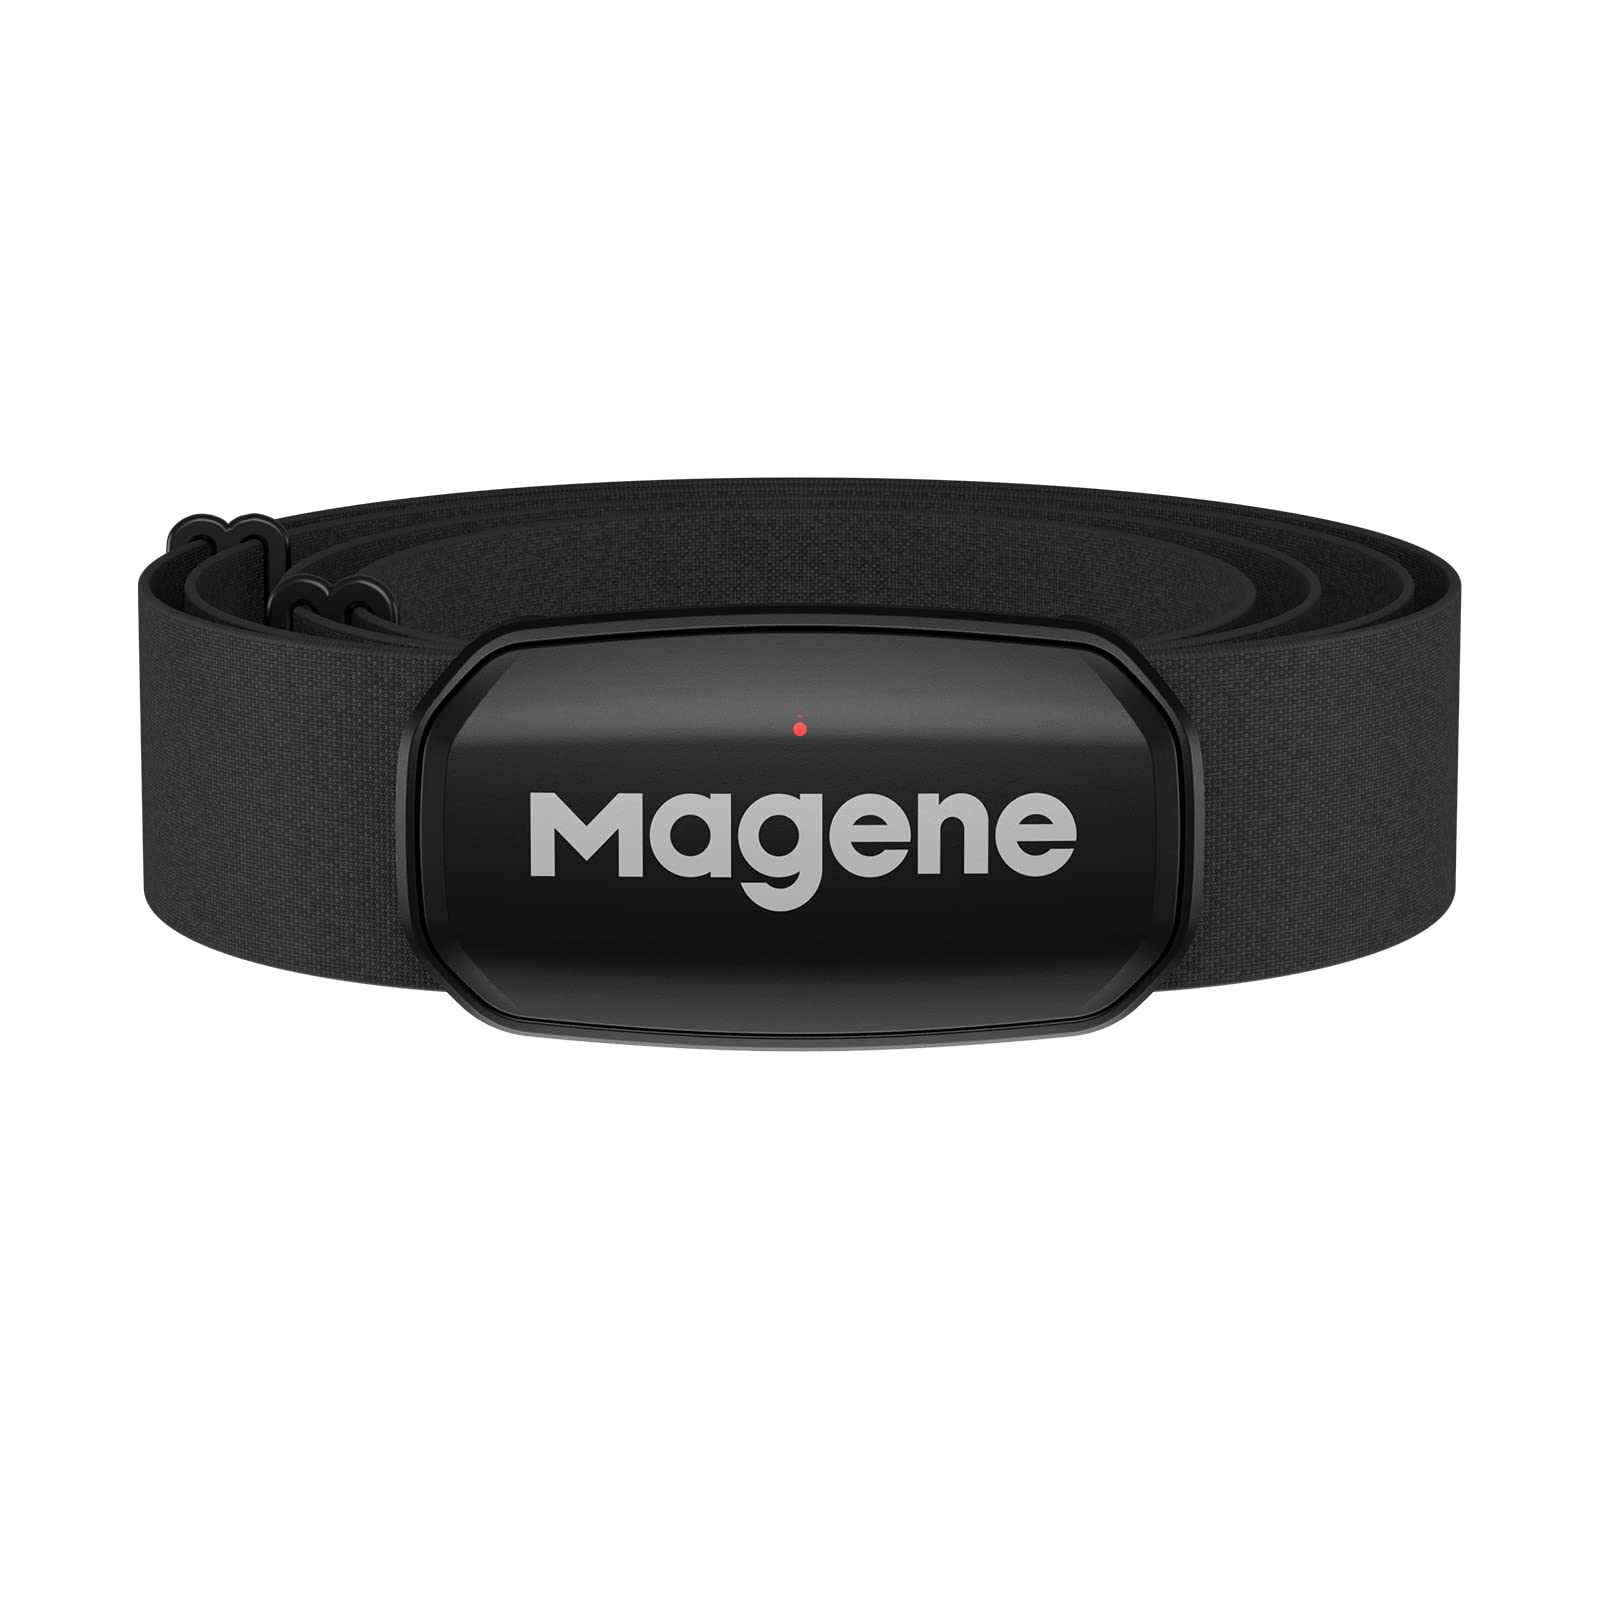 Magene H303 Heart Rate Monitor, Heart Rate Sensor Chest Strap, Protocol ANT+/Bluetooth, Compatible with IOS/Android APPs